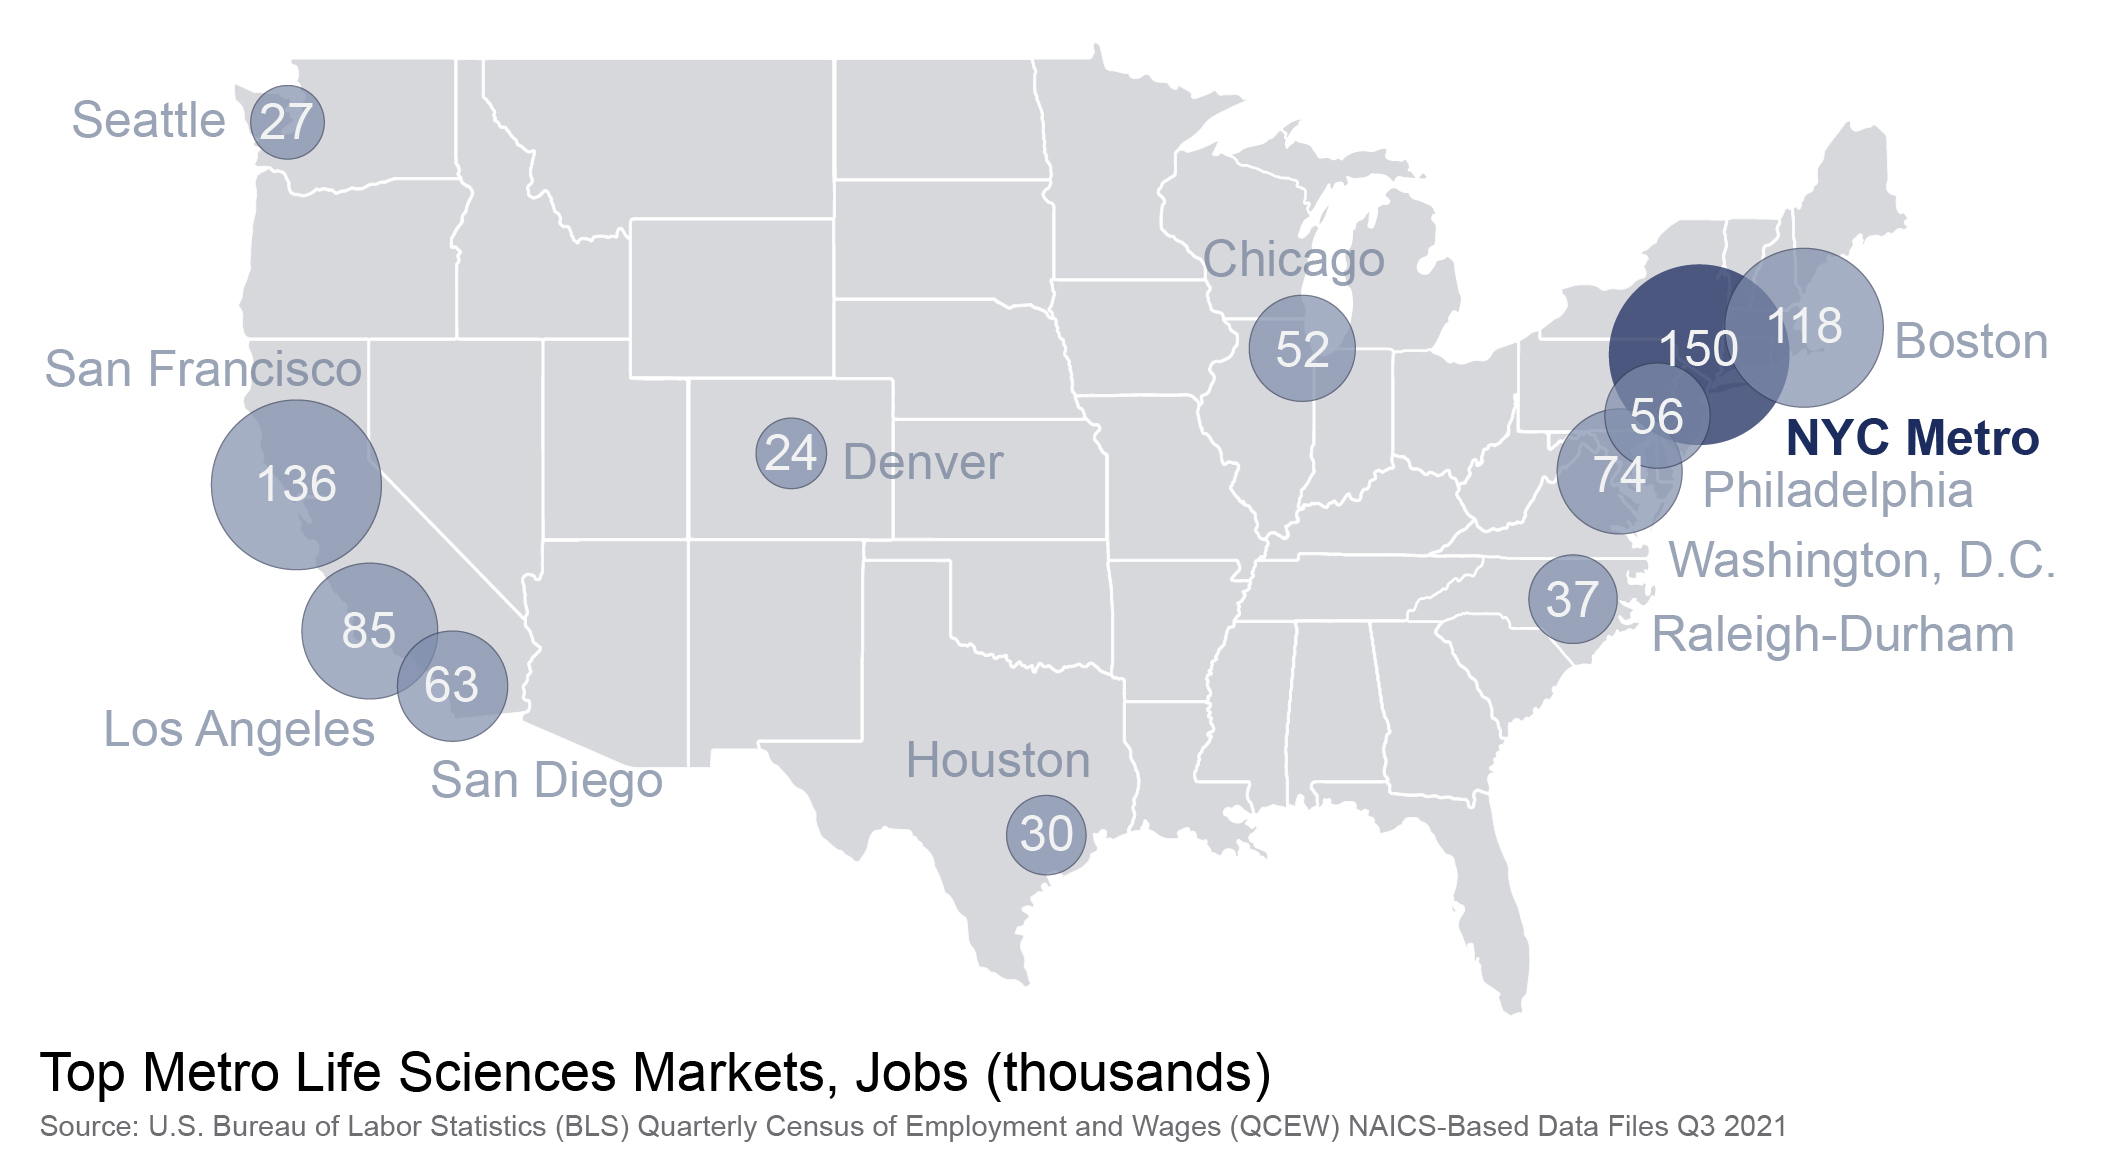 Picture of United States with bubbles depicting where the largest number of metro life science jobs are.